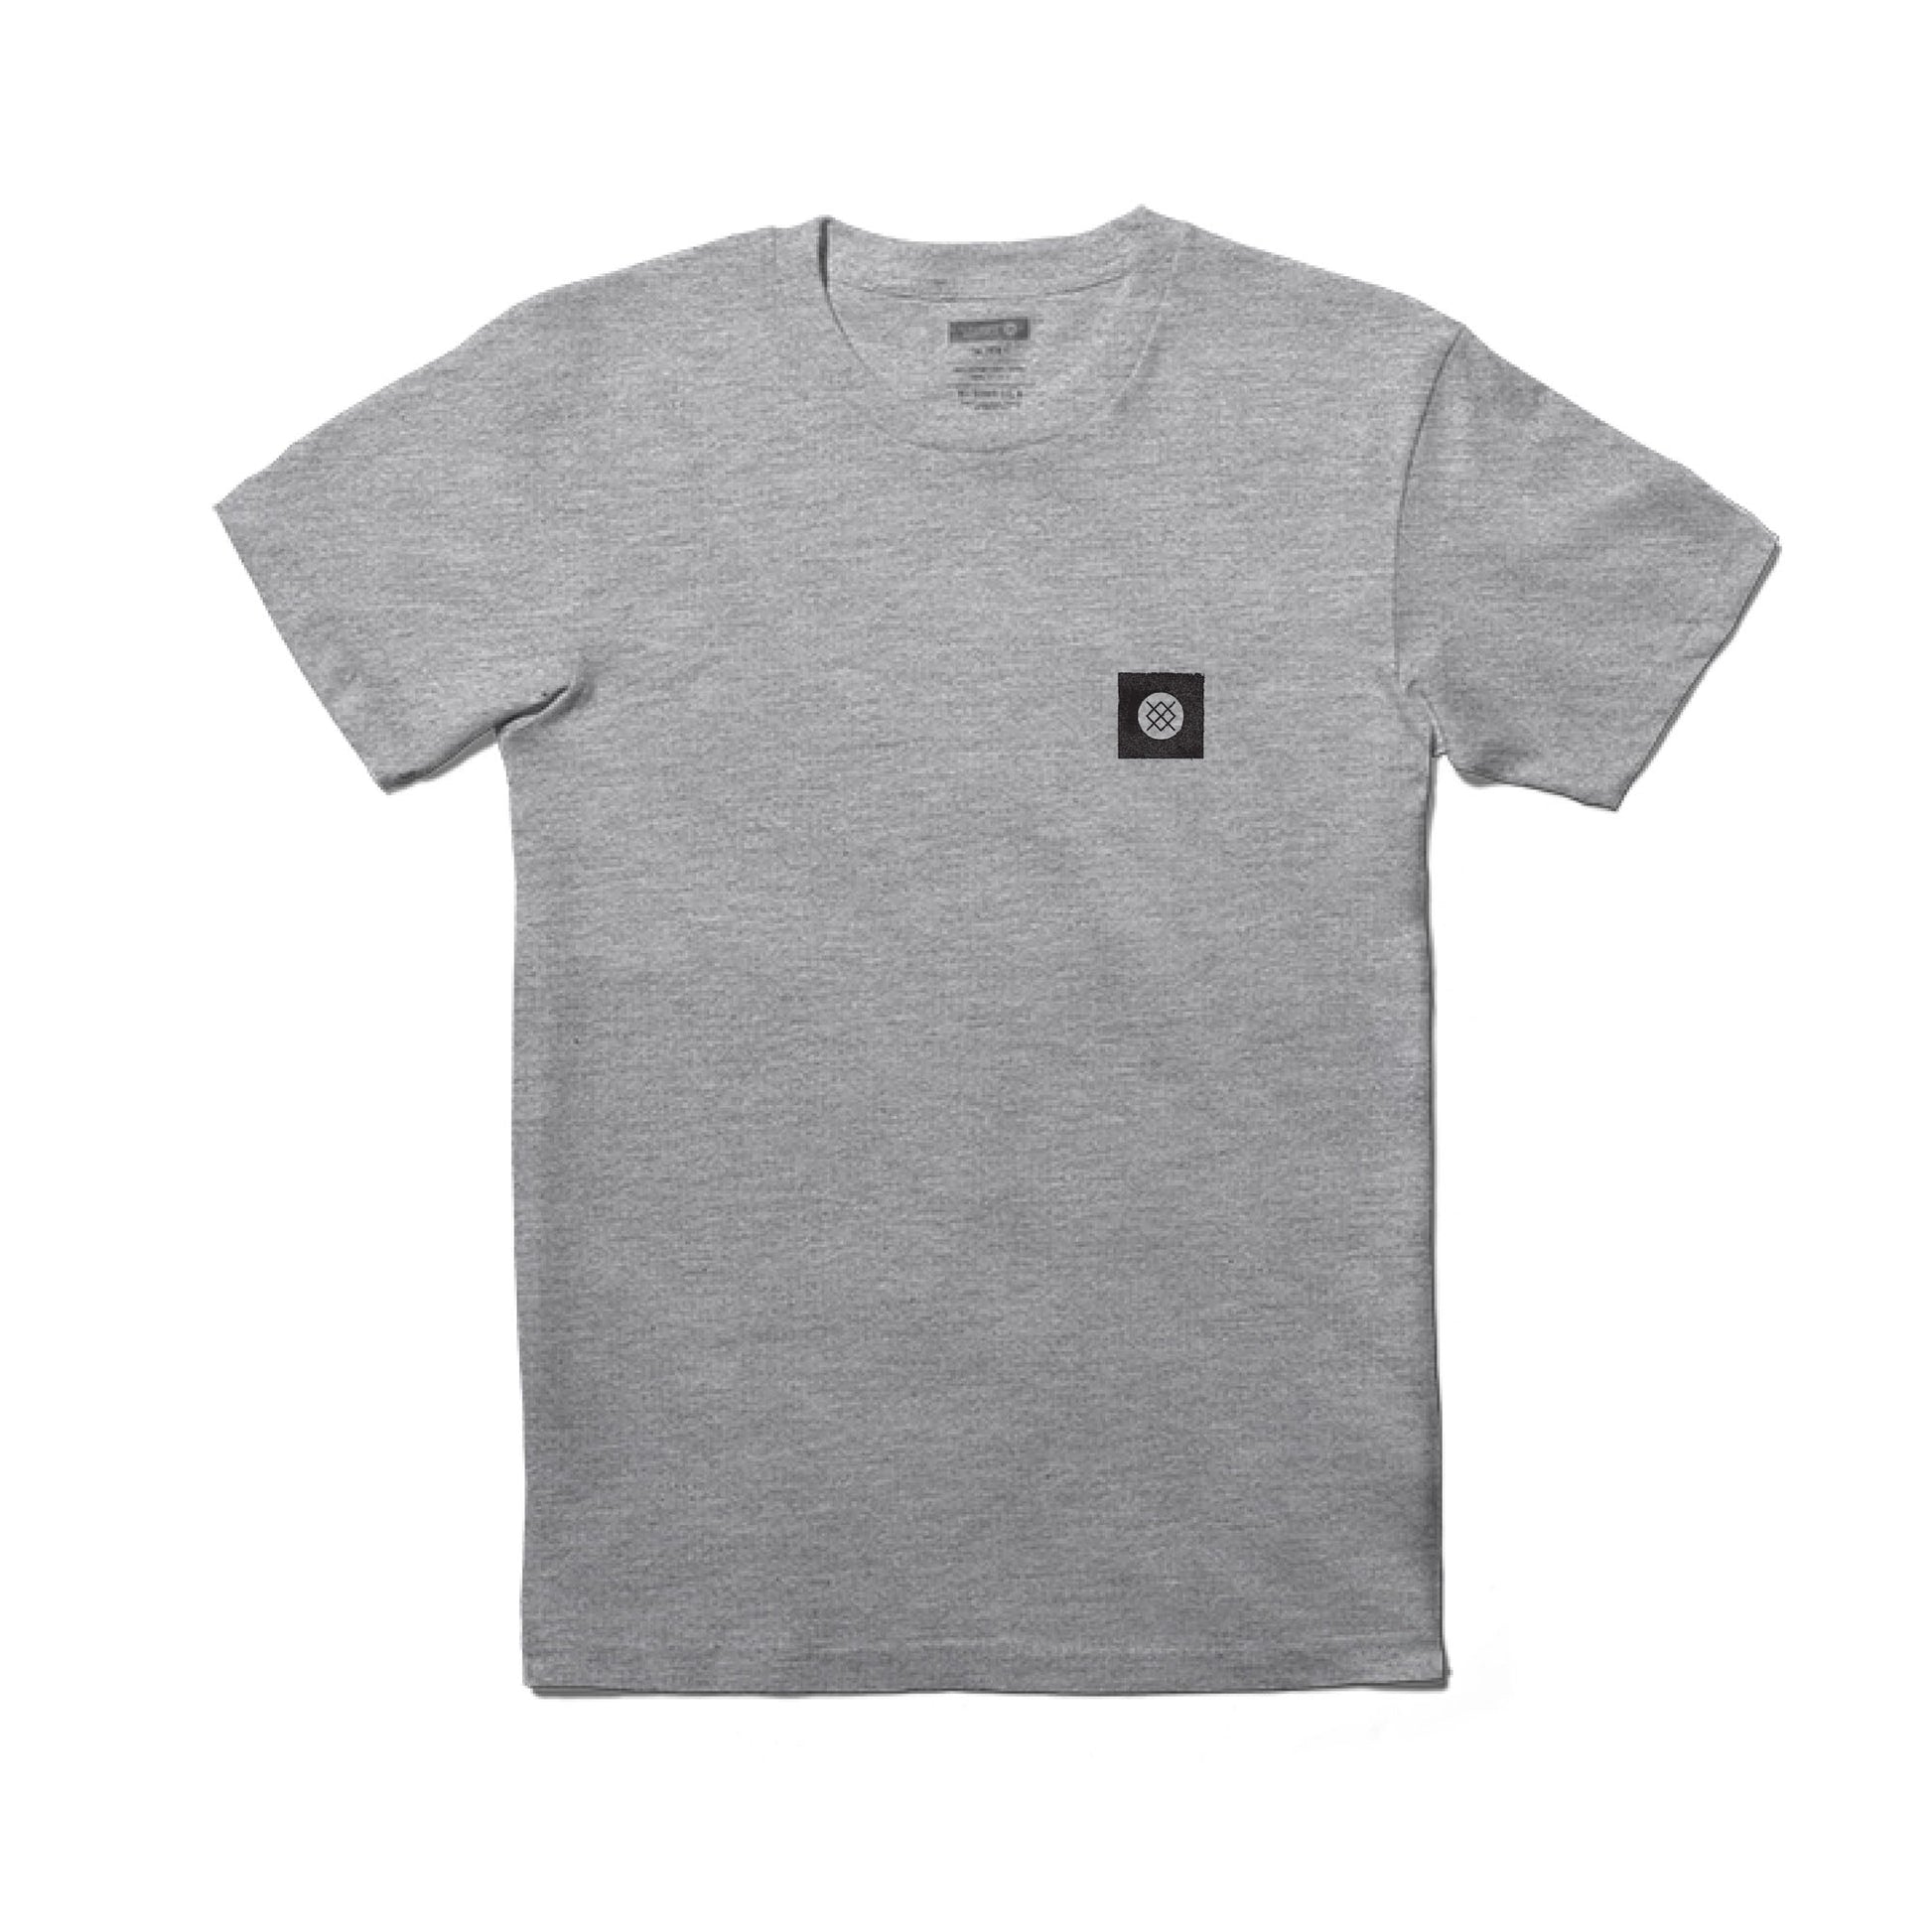 Stance Stance T-Shirt Athletic Grey